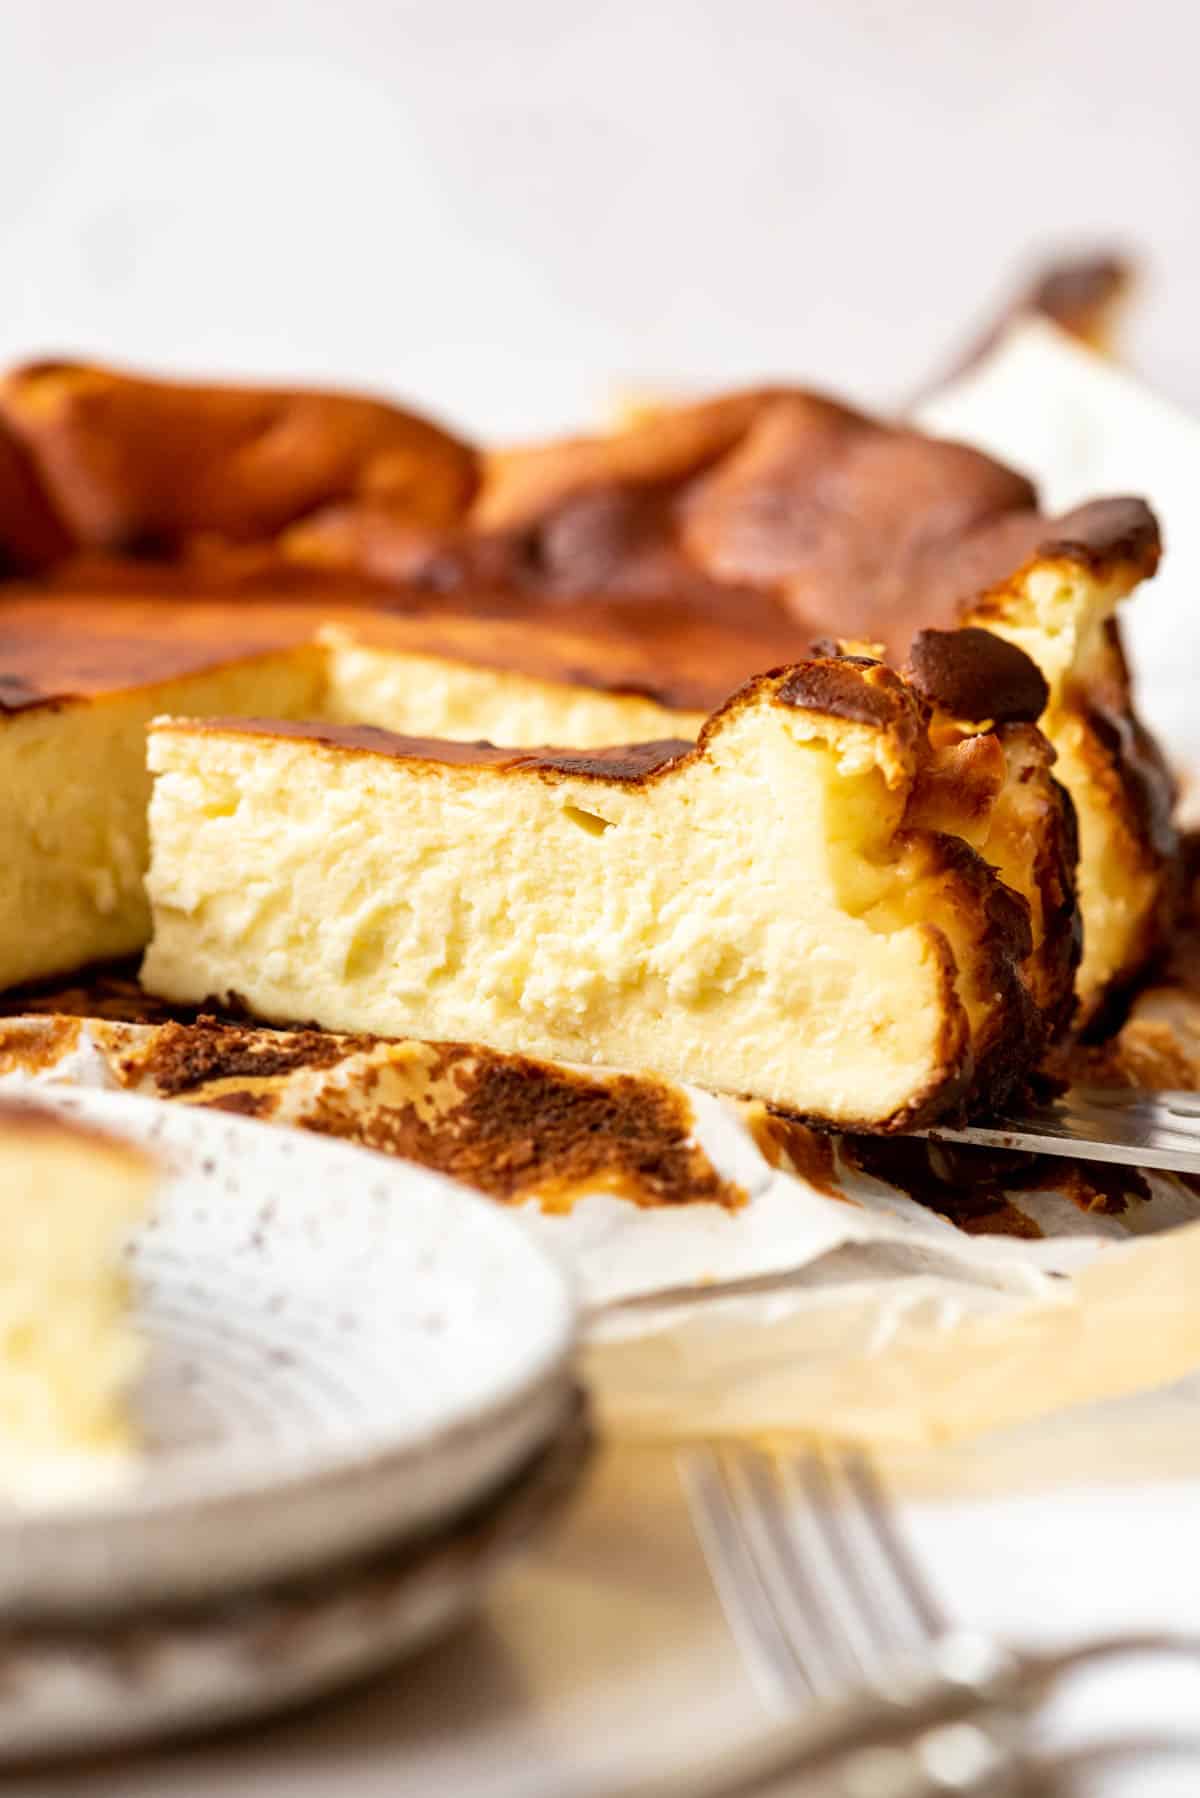 A slice of creamy Basque cheesecake next to the rest of the cheesecake.